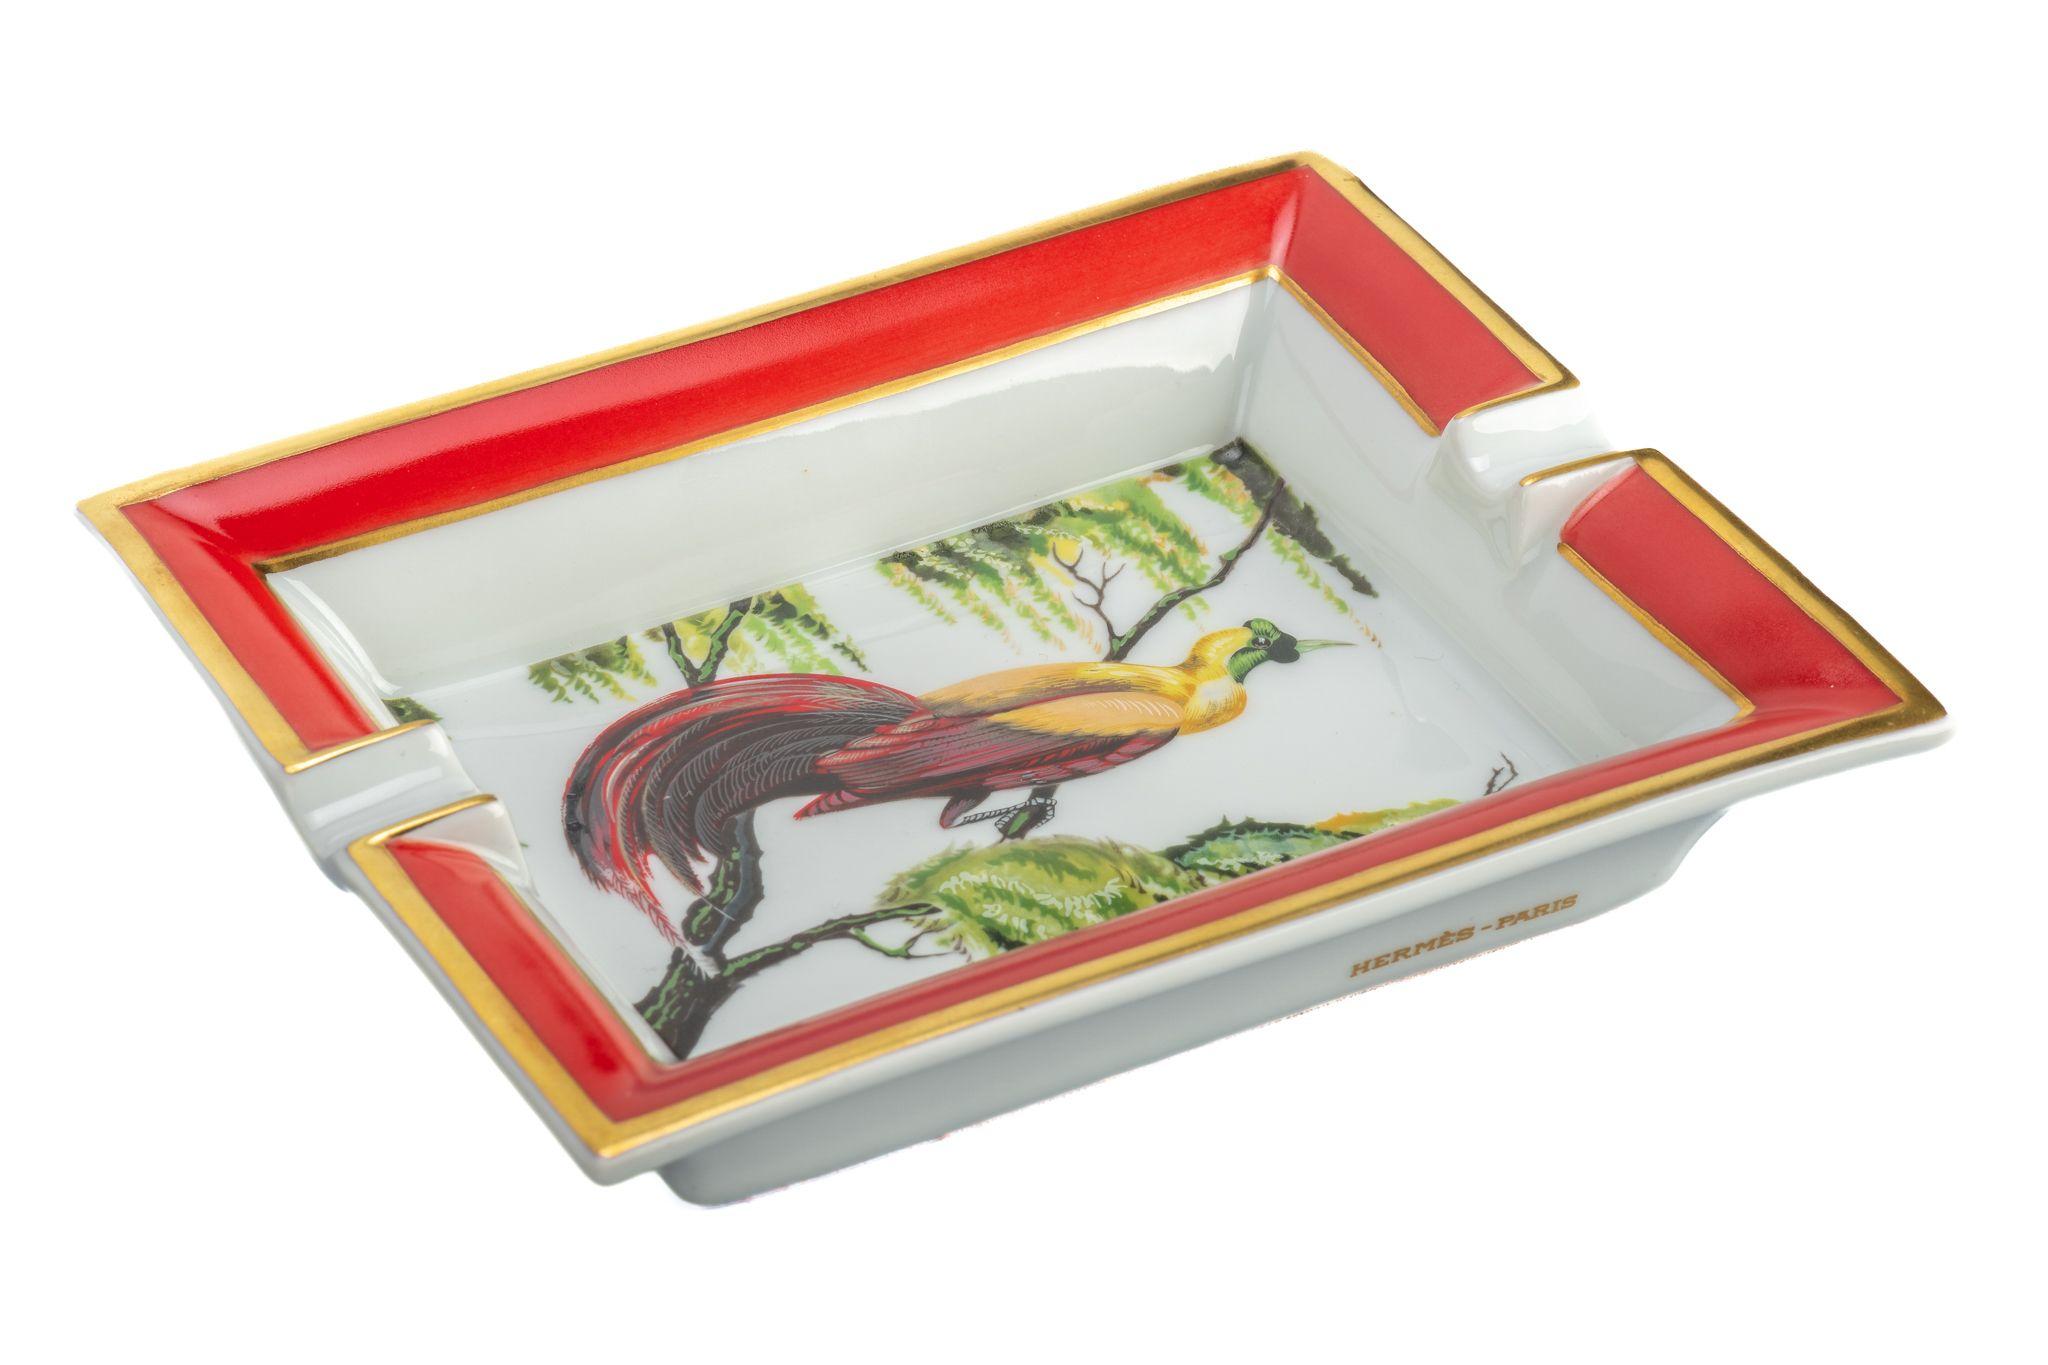 Hermes red, green, white and gold porcelain ashtray with bird design